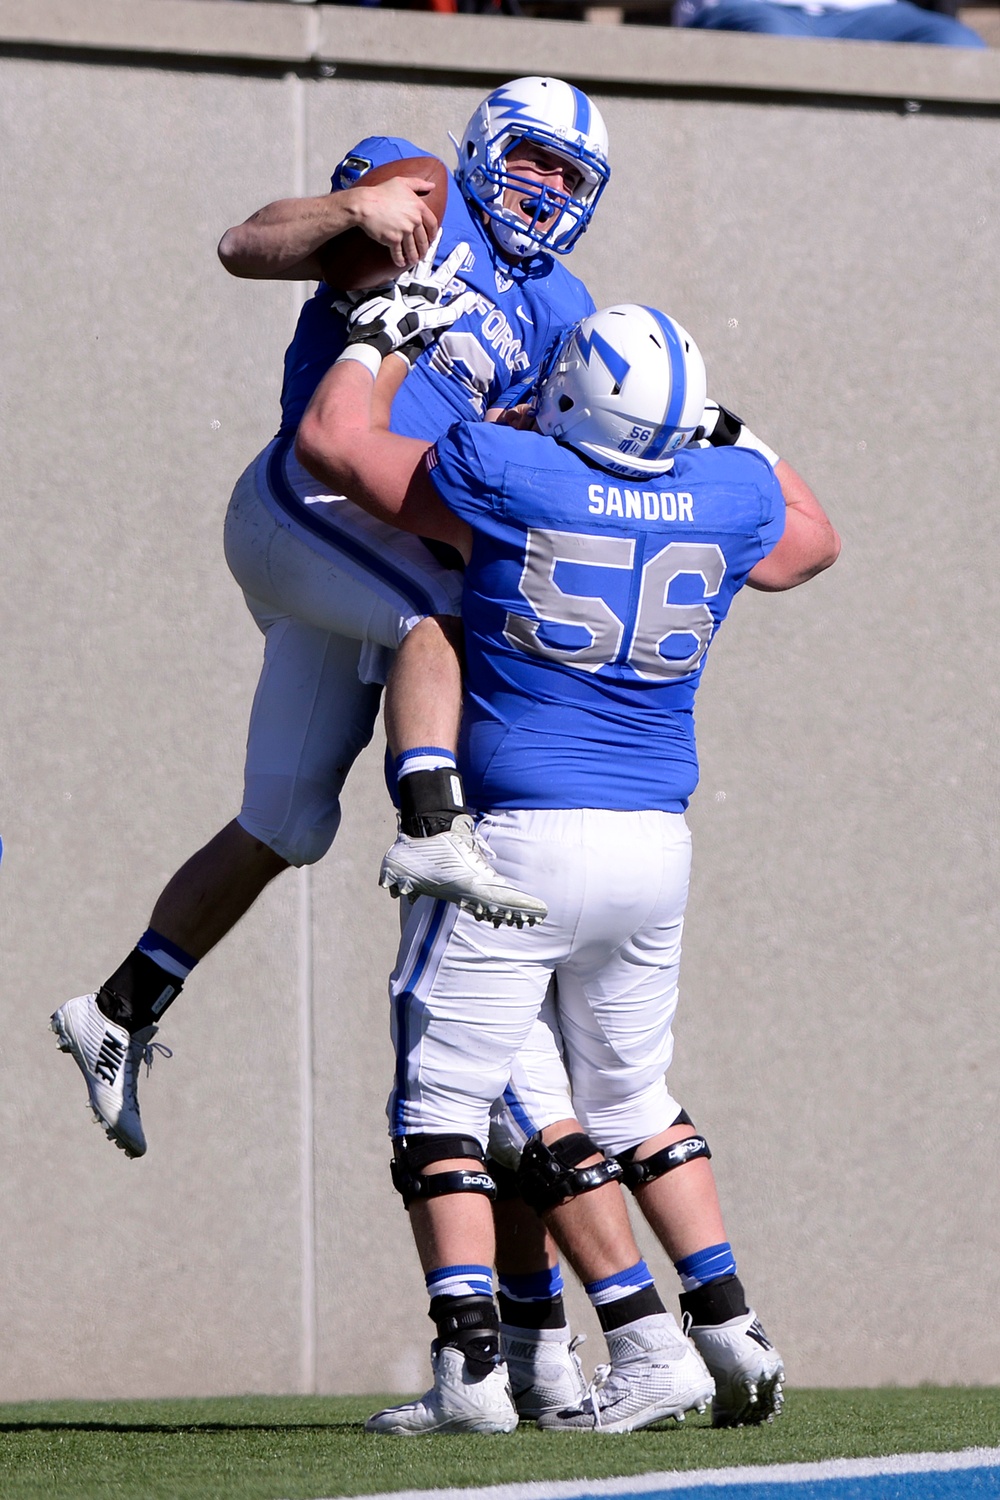 US Air Force Academy vs. Fresno State football